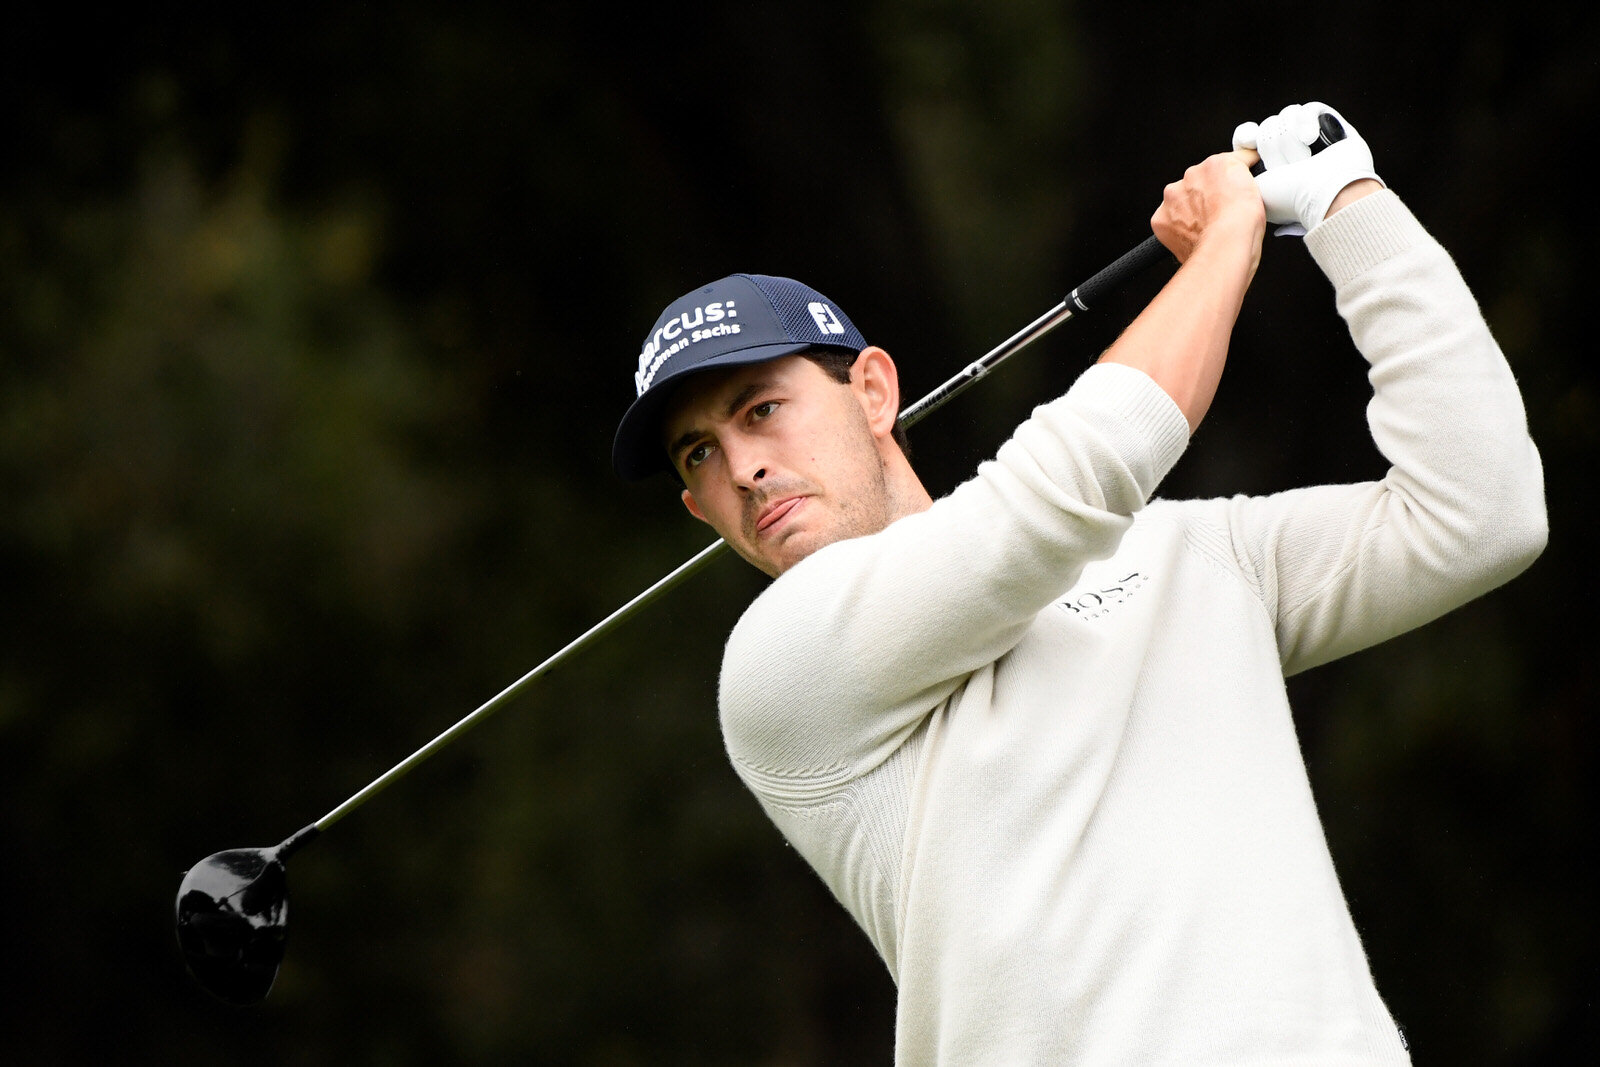  THOUSAND OAKS, CALIFORNIA - OCTOBER 25: Patrick Cantlay of the United States plays his shot from the second tee during the final round of the Zozo Championship @ Sherwood on October 25, 2020 in Thousand Oaks, California. (Photo by Harry How/Getty Im